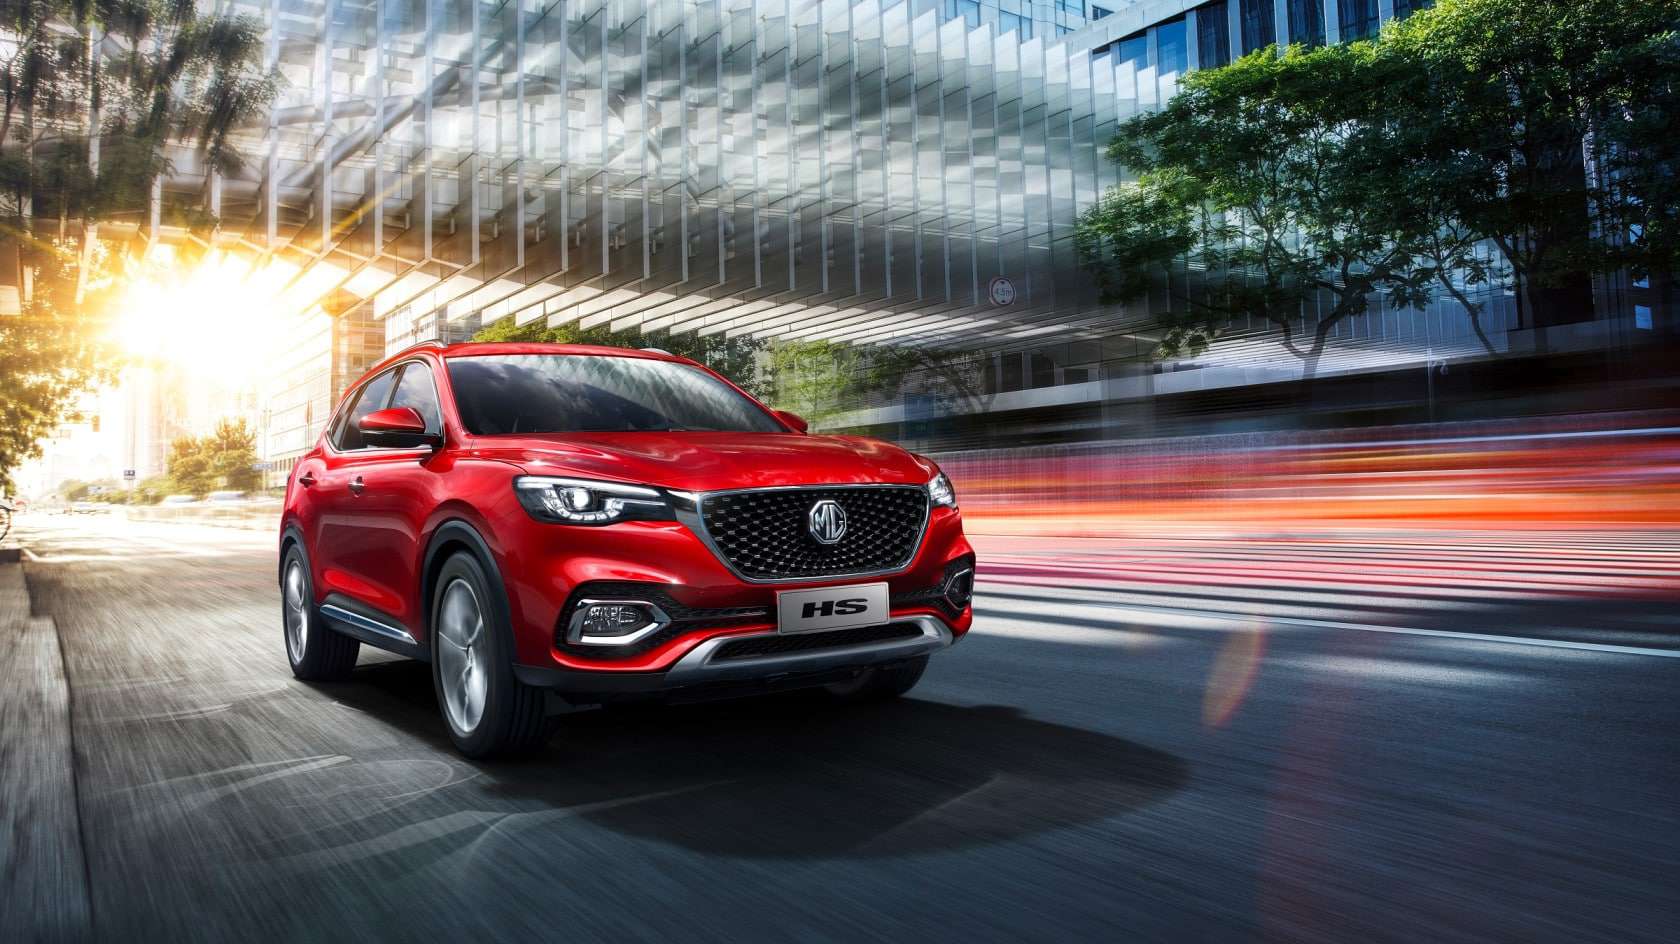 MG Motors to Launch an All-New E-Commerce Platform